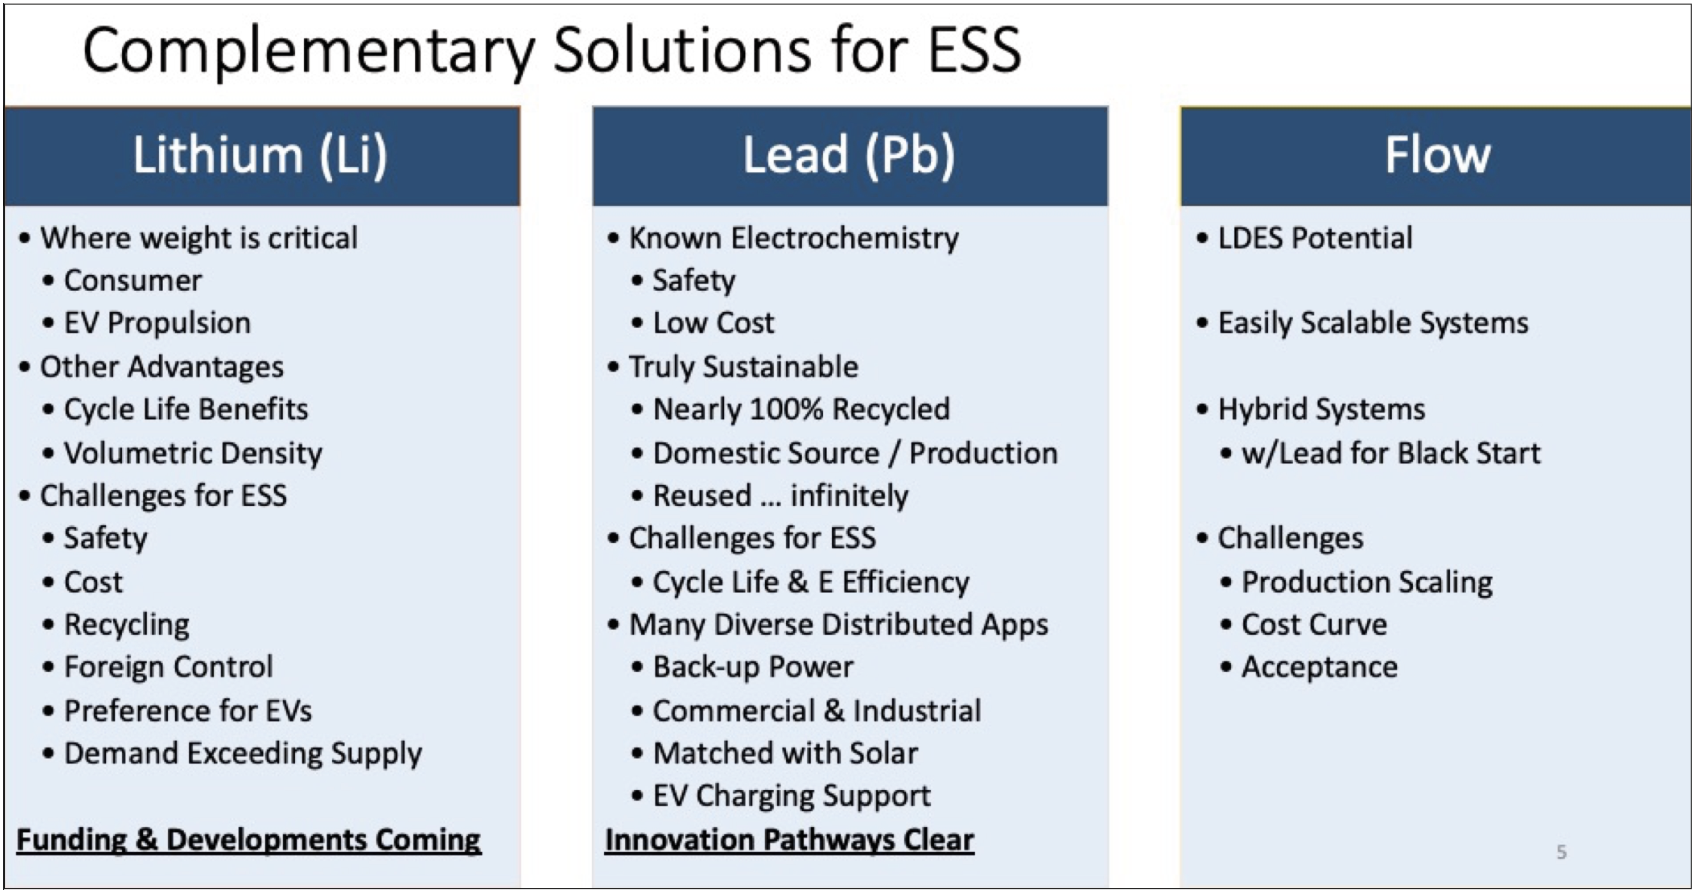 Complementary solutions for ESS